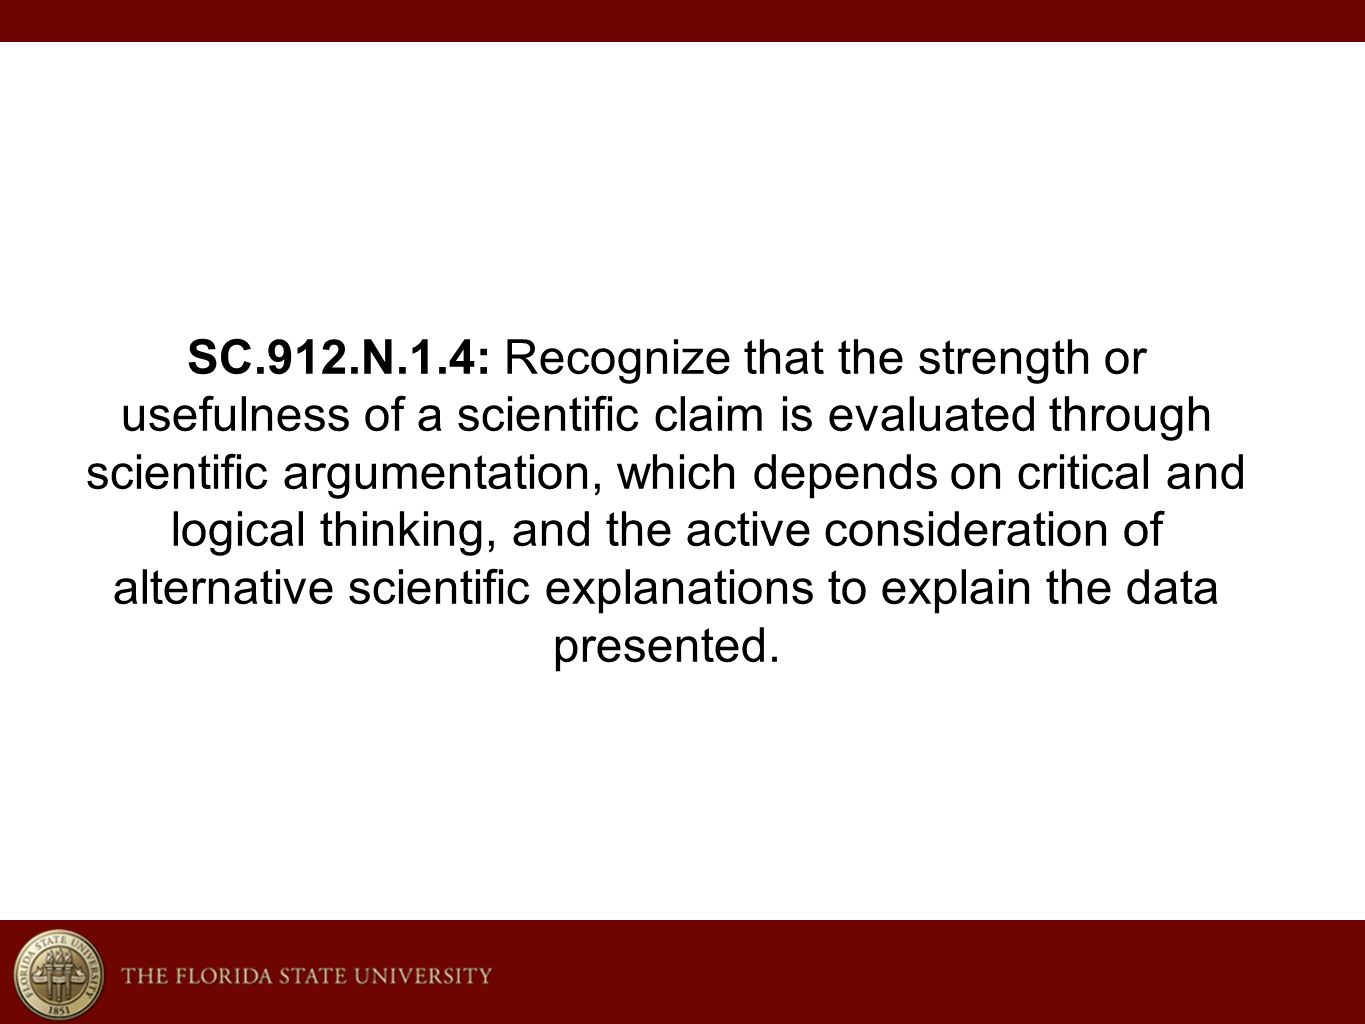 SC.912.N.1.4: Recognize that the strength or usefulness of a scientific claim is evaluated through scientific argumentation, which depends on critical and logical thinking, and the active consideration of alternative scientific explanations to explain the data presented.